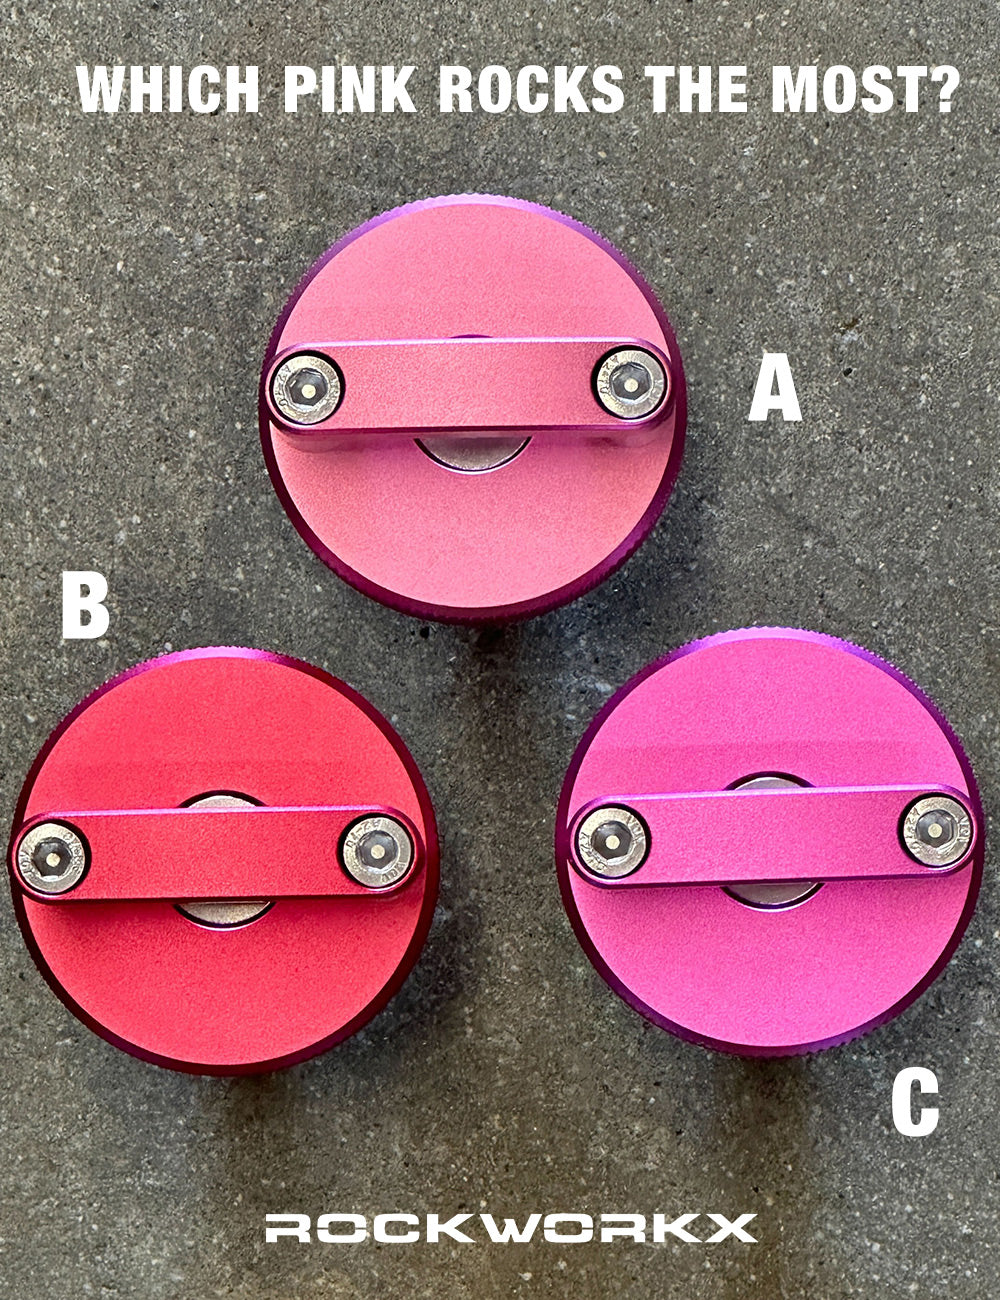 ENTER THE DRAW TO WIN A SET OF PINK THUMBSCREWS